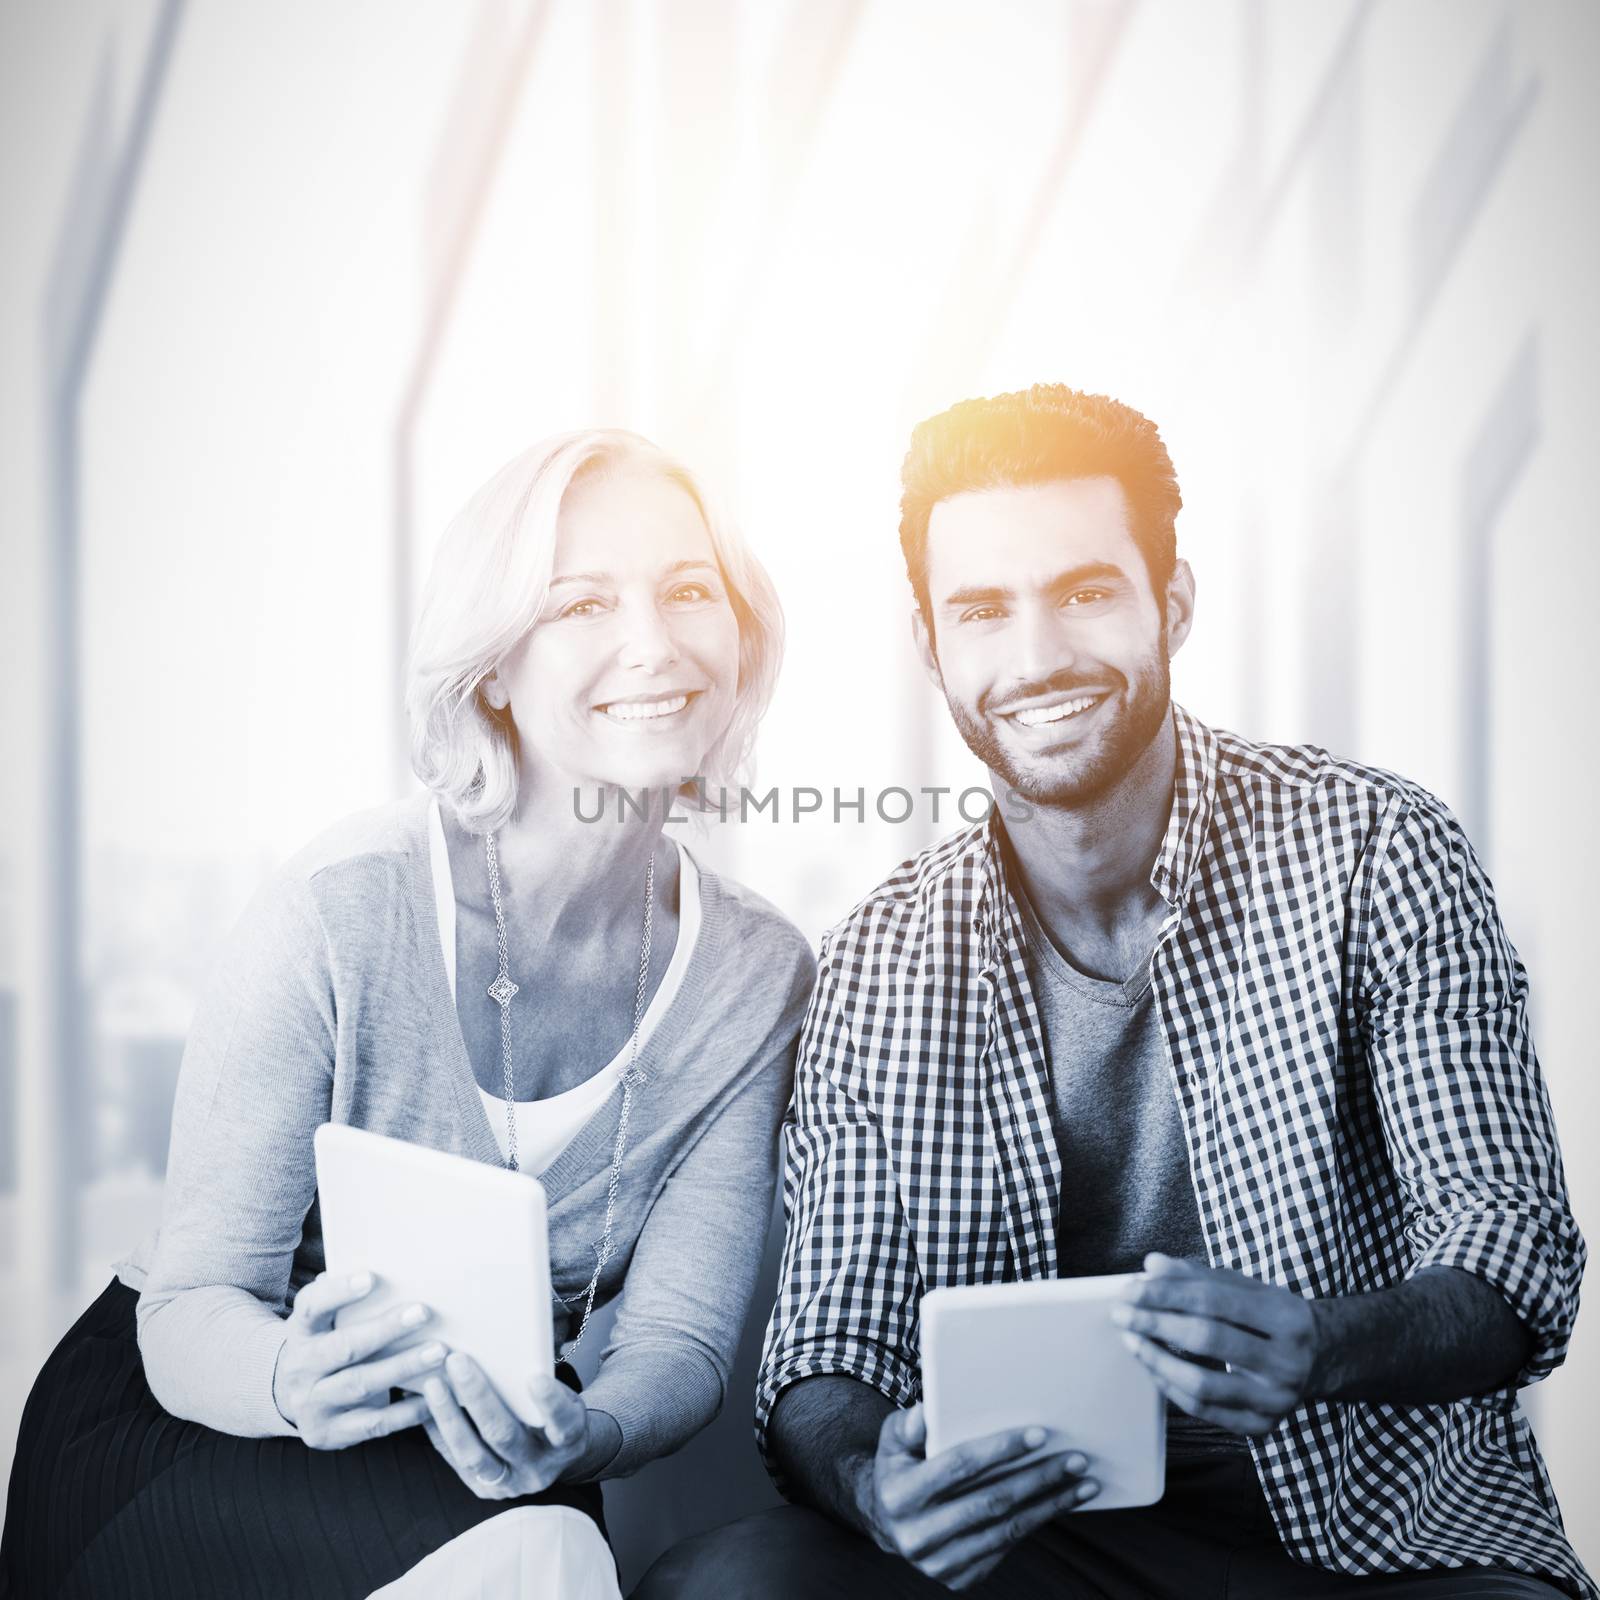 Composite image of smiling business people looking at camera by Wavebreakmedia